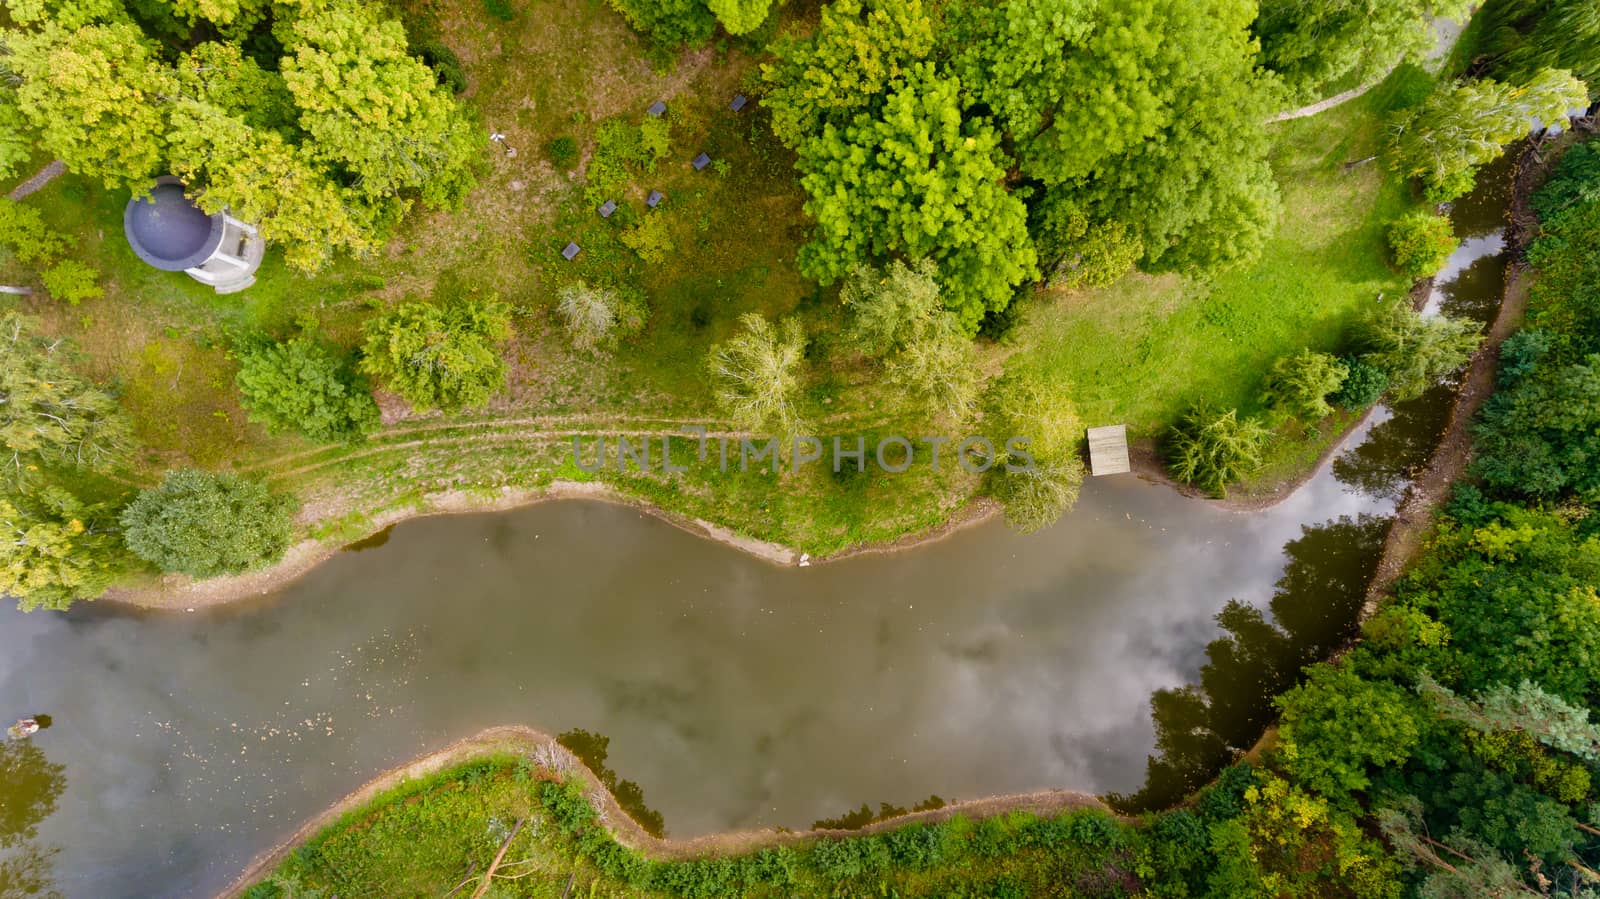 Top view of a small lake in a green forest. Aerial view.